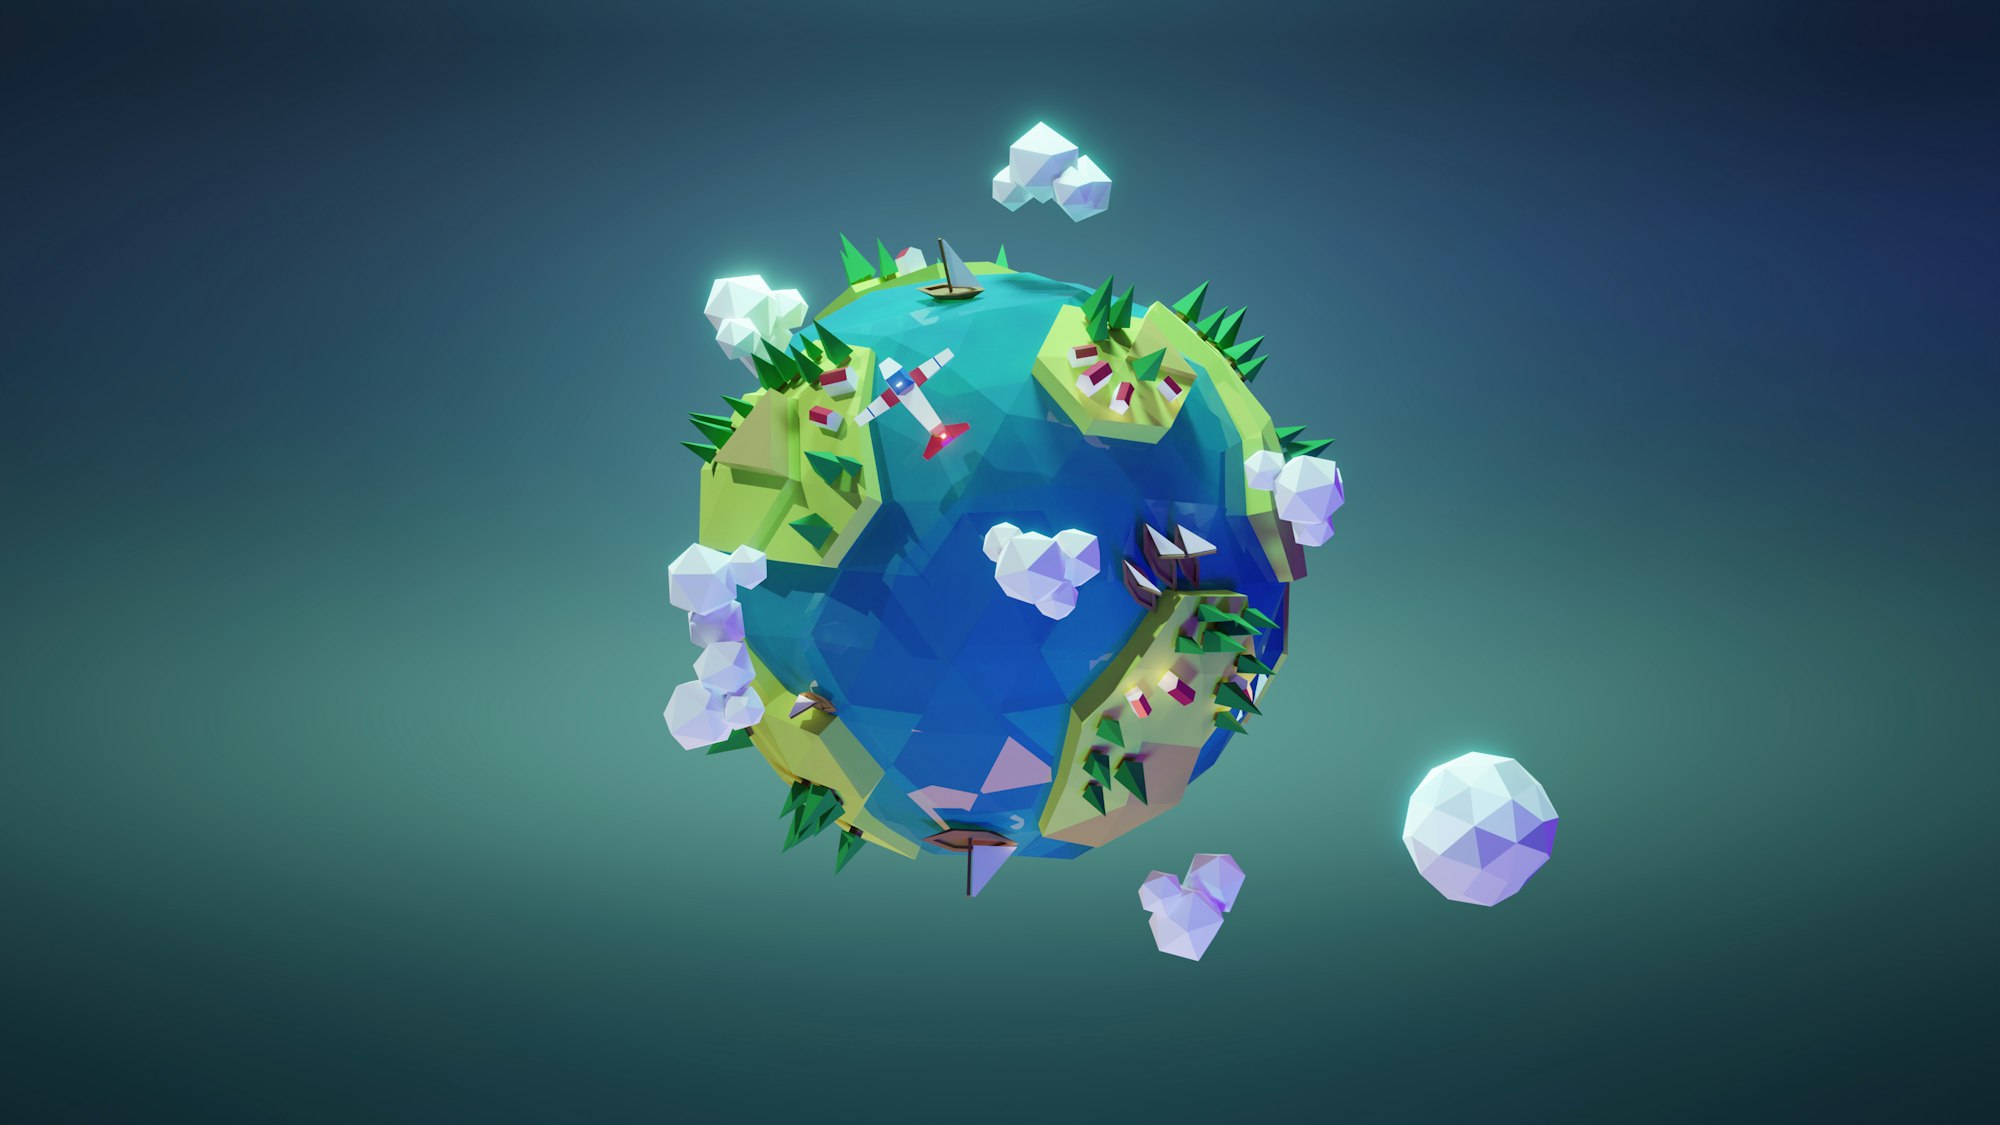 A 3D render of a low poly planet. Made in Blender.